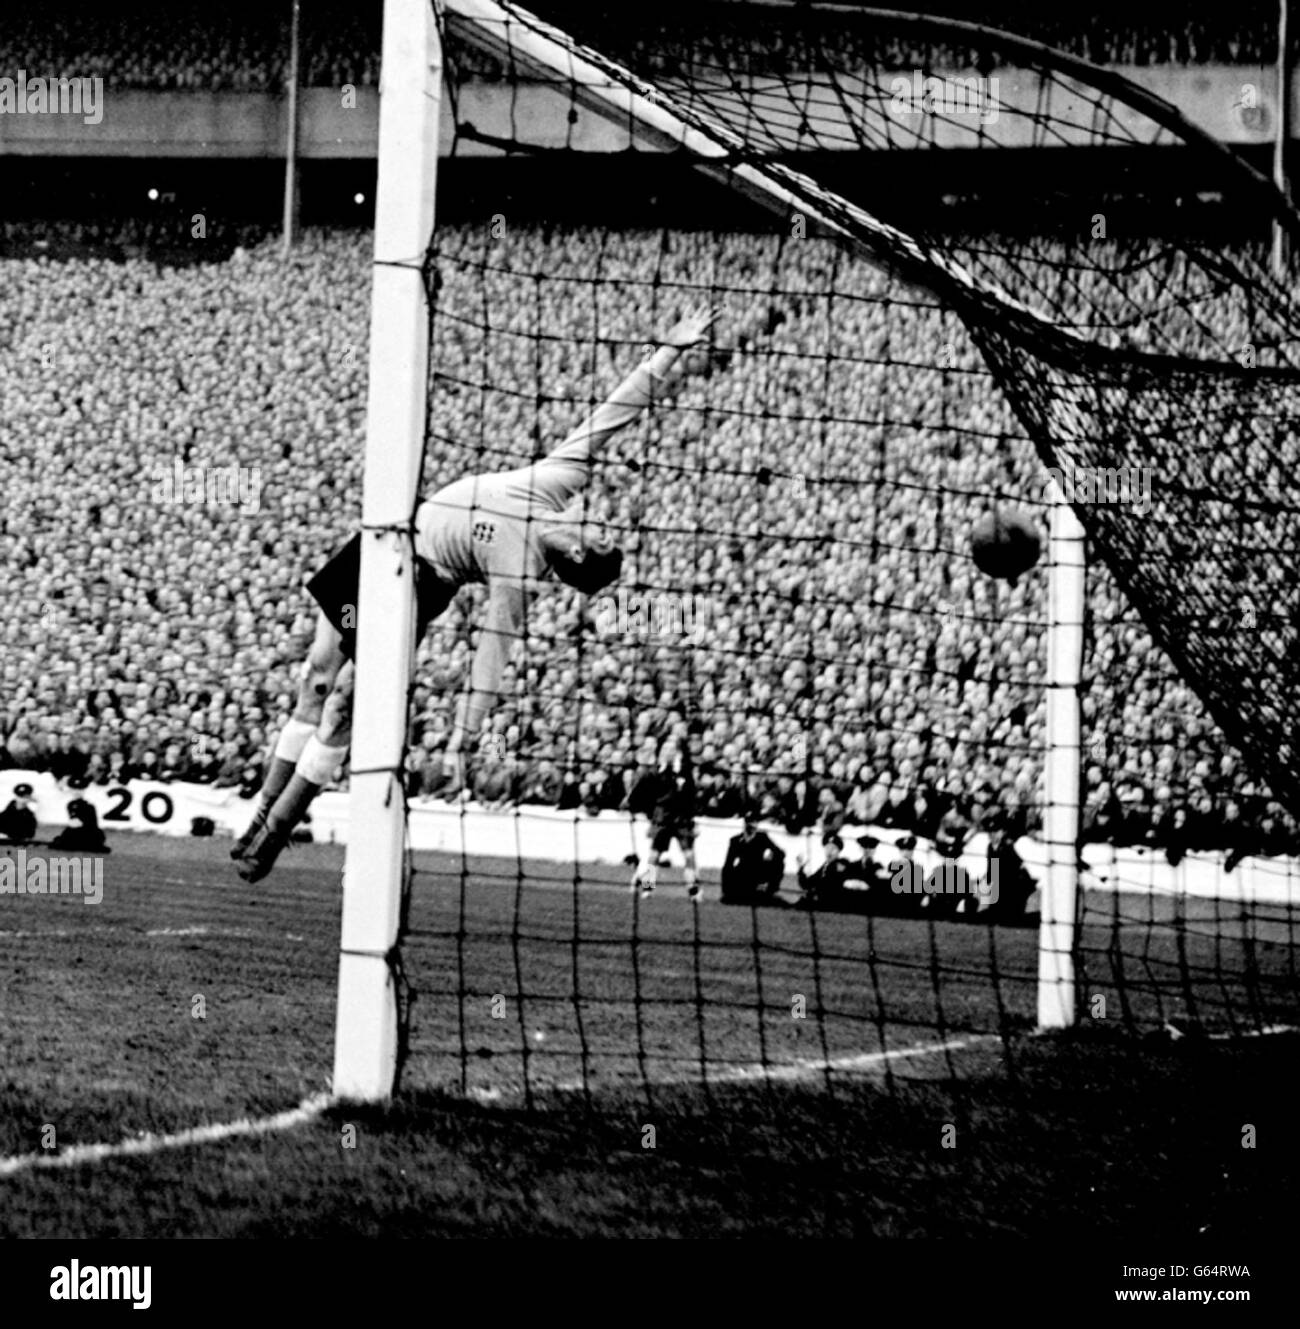 England goalkeeper Matthews arches in a backward bend but he cannot save this shot from outside right Leggat, which gave Scotland the lead in the international soccer match at Hampden Park, Glasgow. Stock Photo